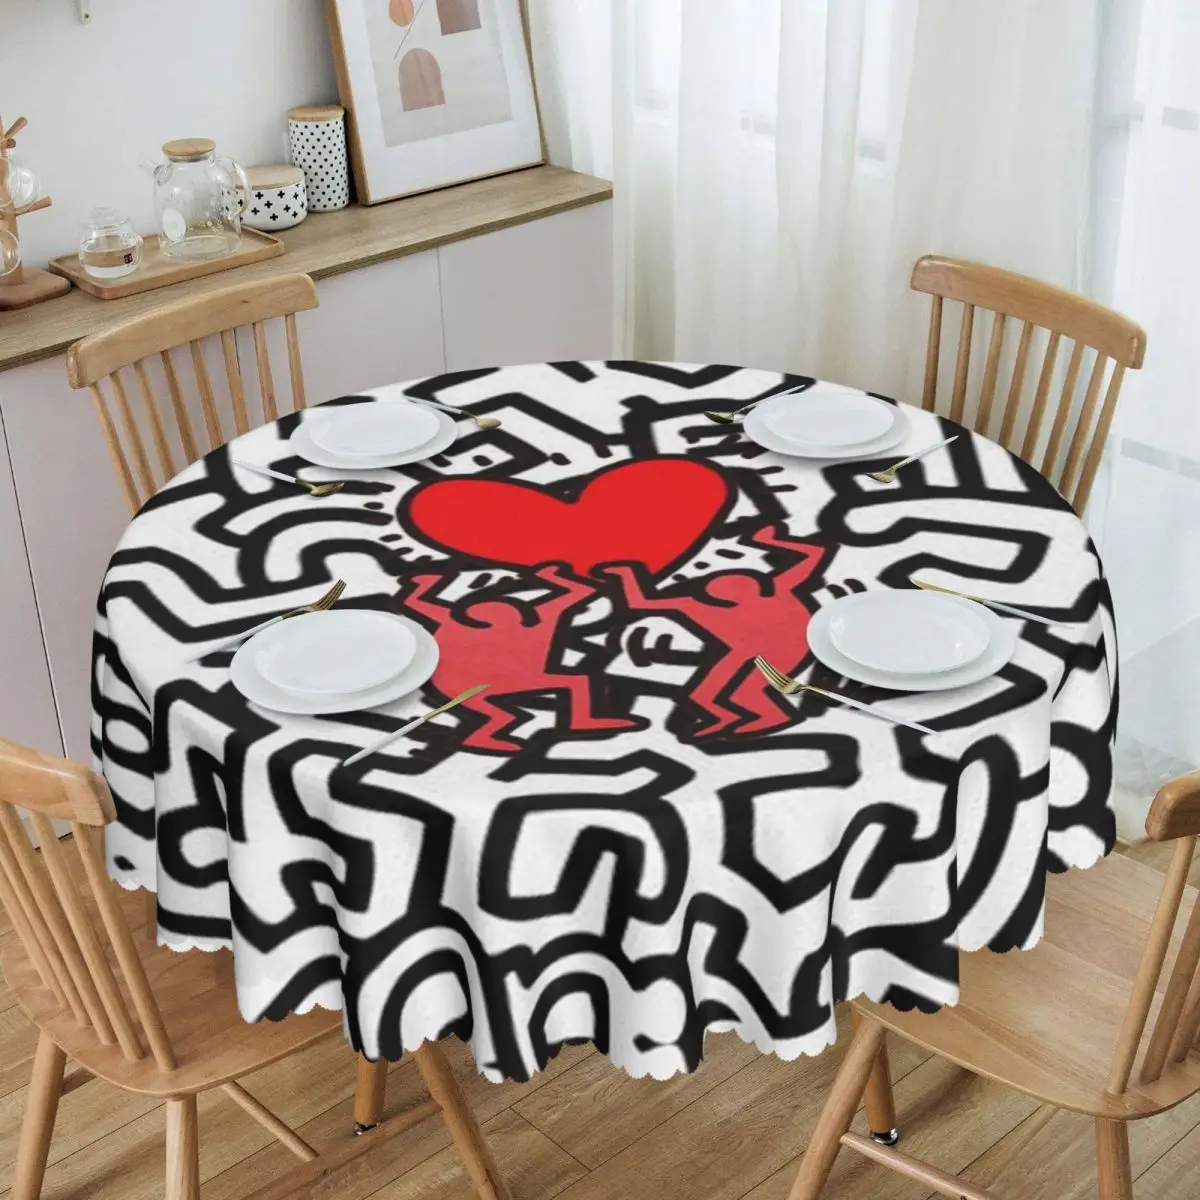 

Funny Two Red People Round Tablecloths 60 Inches Haring Geometric Graffiti Table Covers for Parties Table Cloth